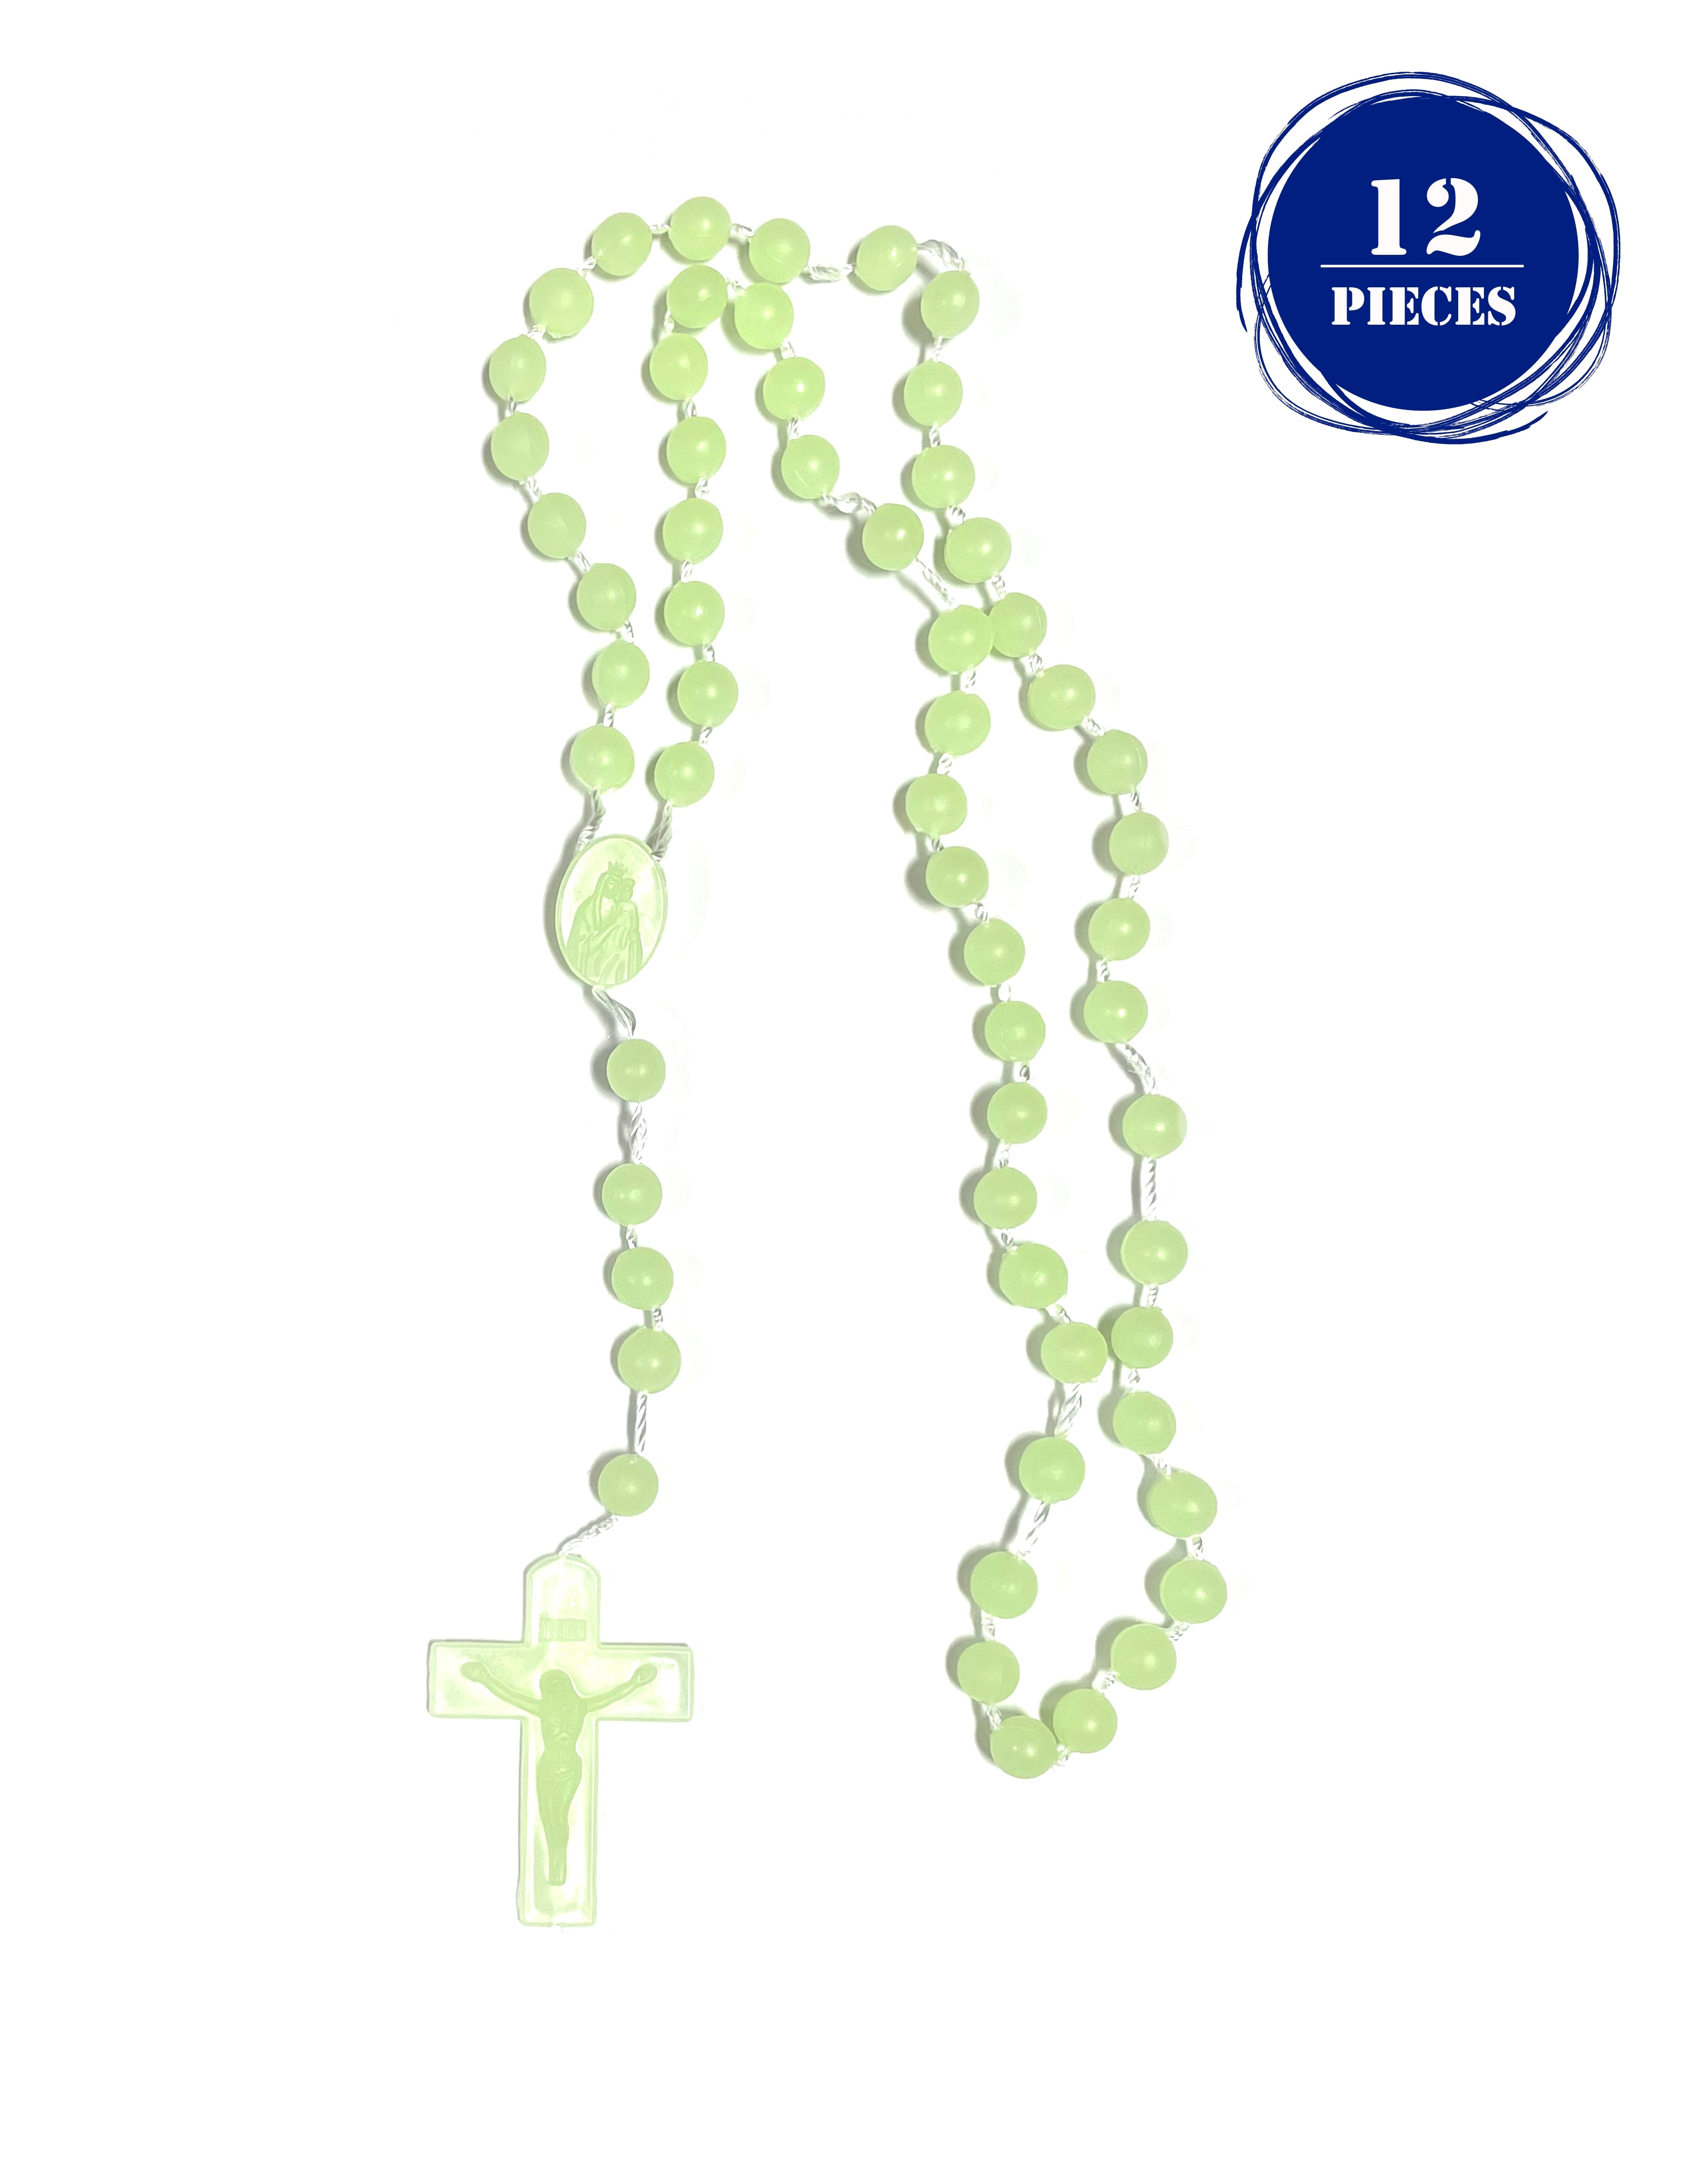 Plastic Big Beads and Cord Rosary - 12 Pieces Green / 12 Pieces